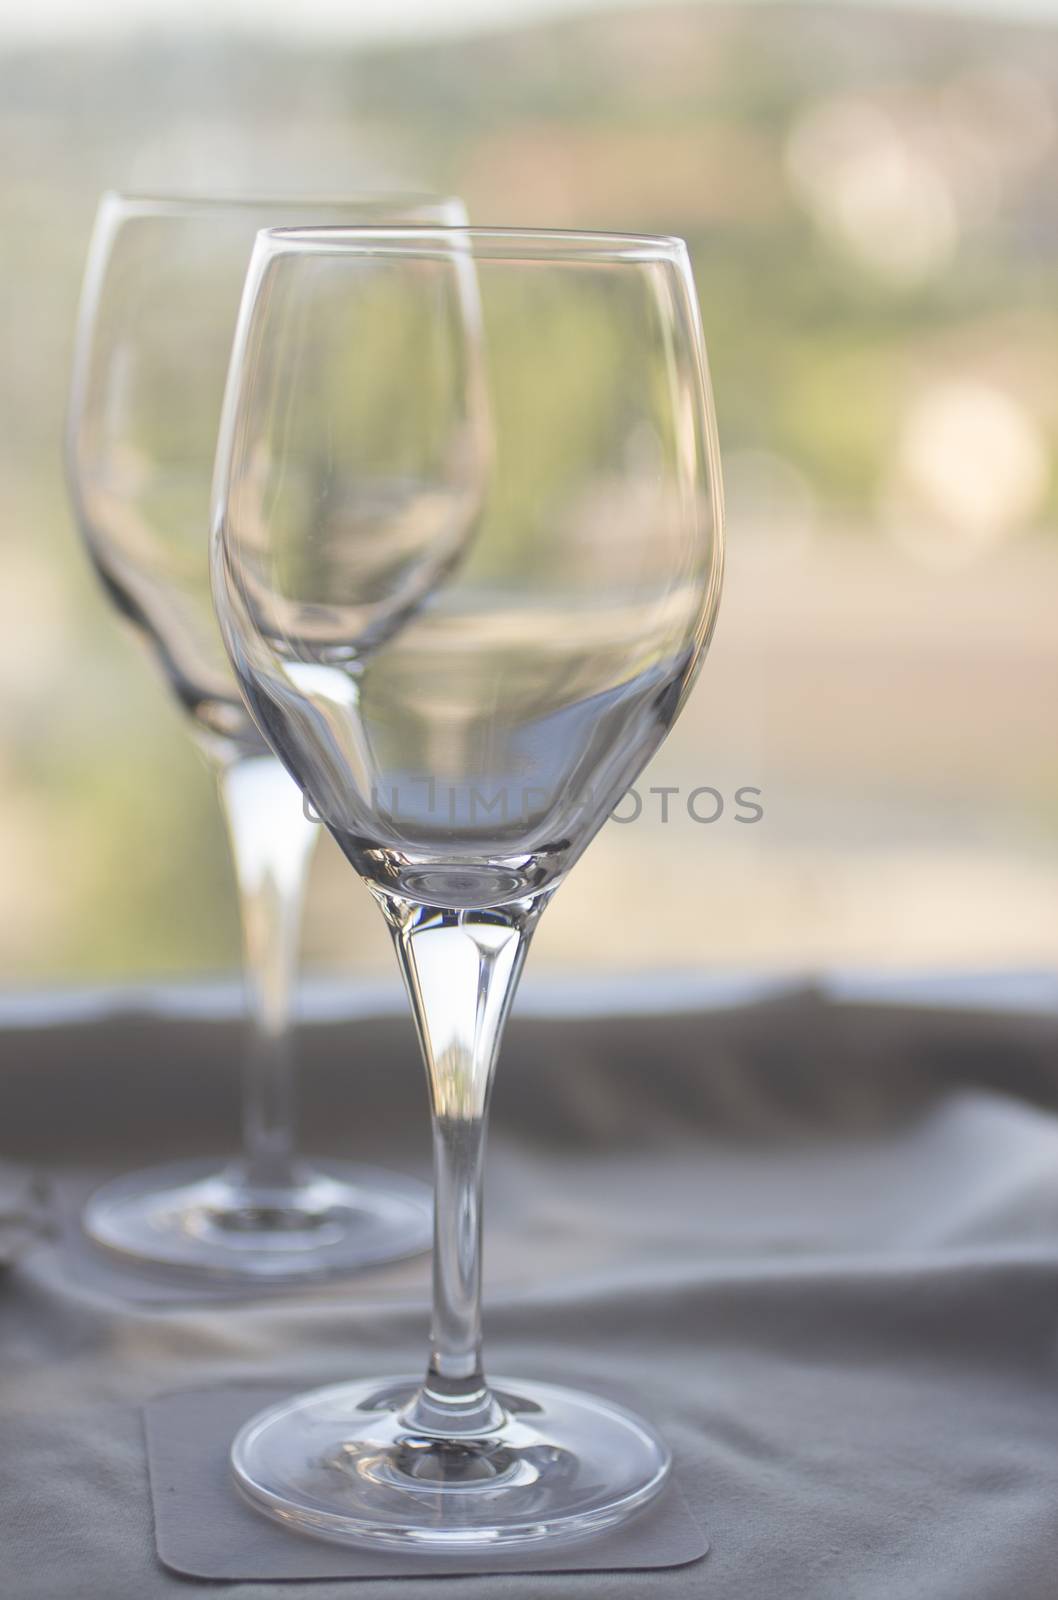 Still life photo of two wine or water glasses on coasters on cloth on tray on a table in room with window behind in soft evening pastel color light out of focus in background. 